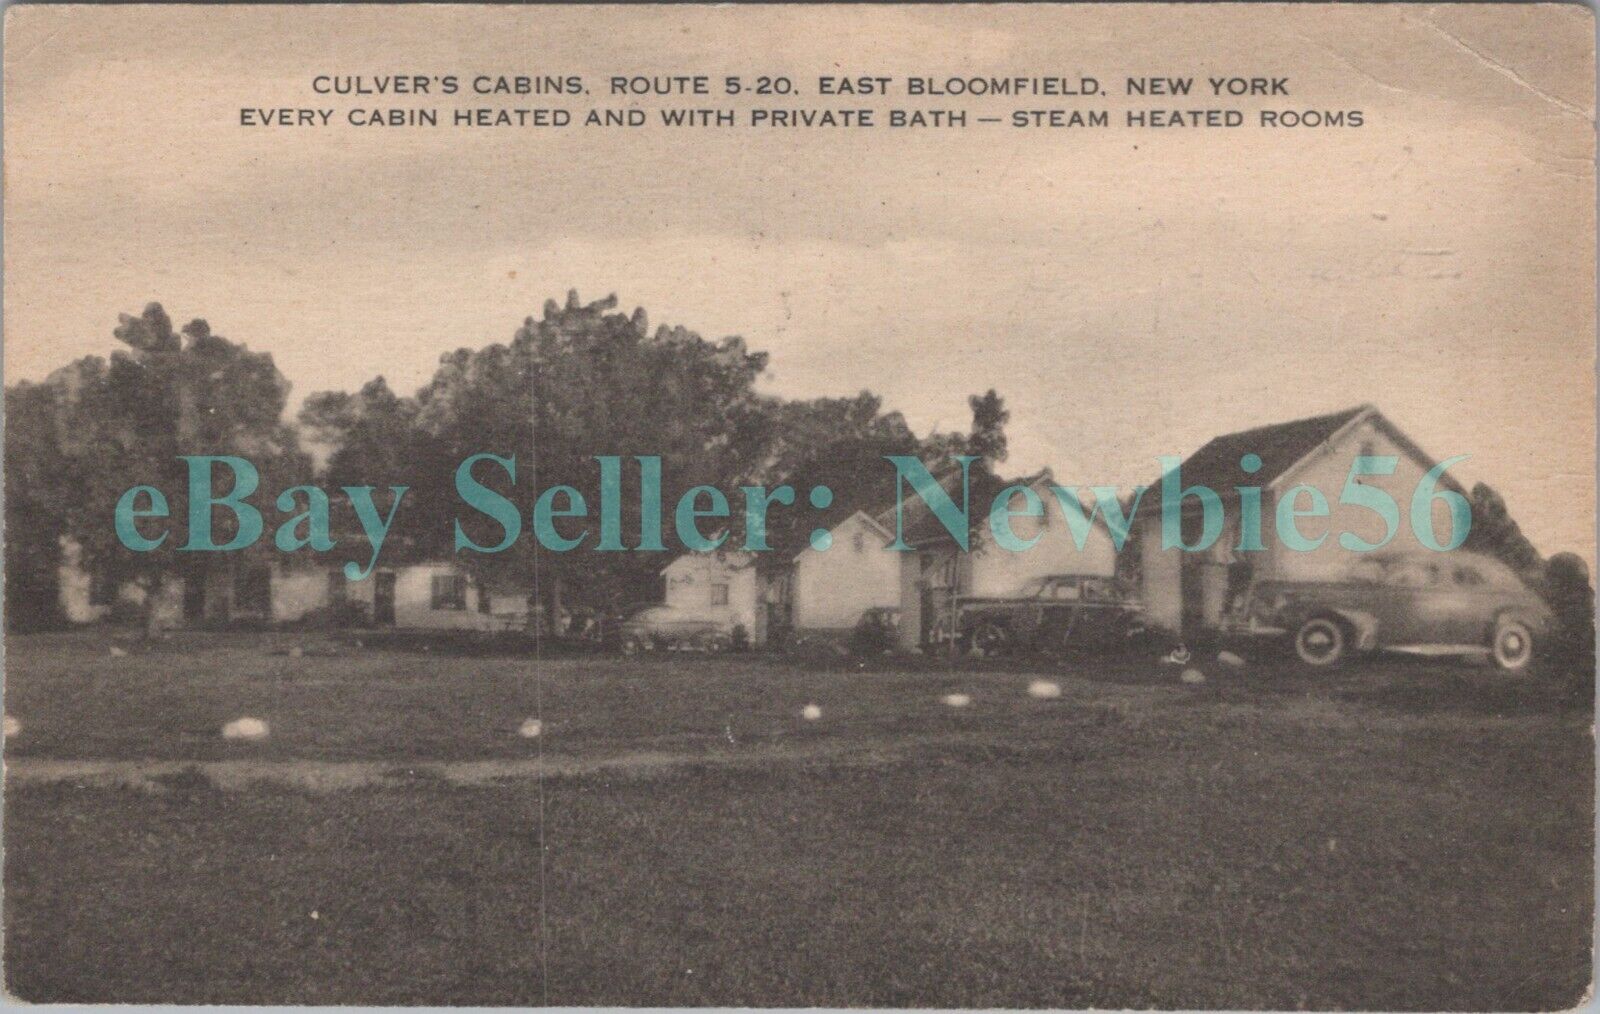 East Bloomfield NY - CULVER'S CABINS ON ROUTE 5-20 - Postcard Roadside 